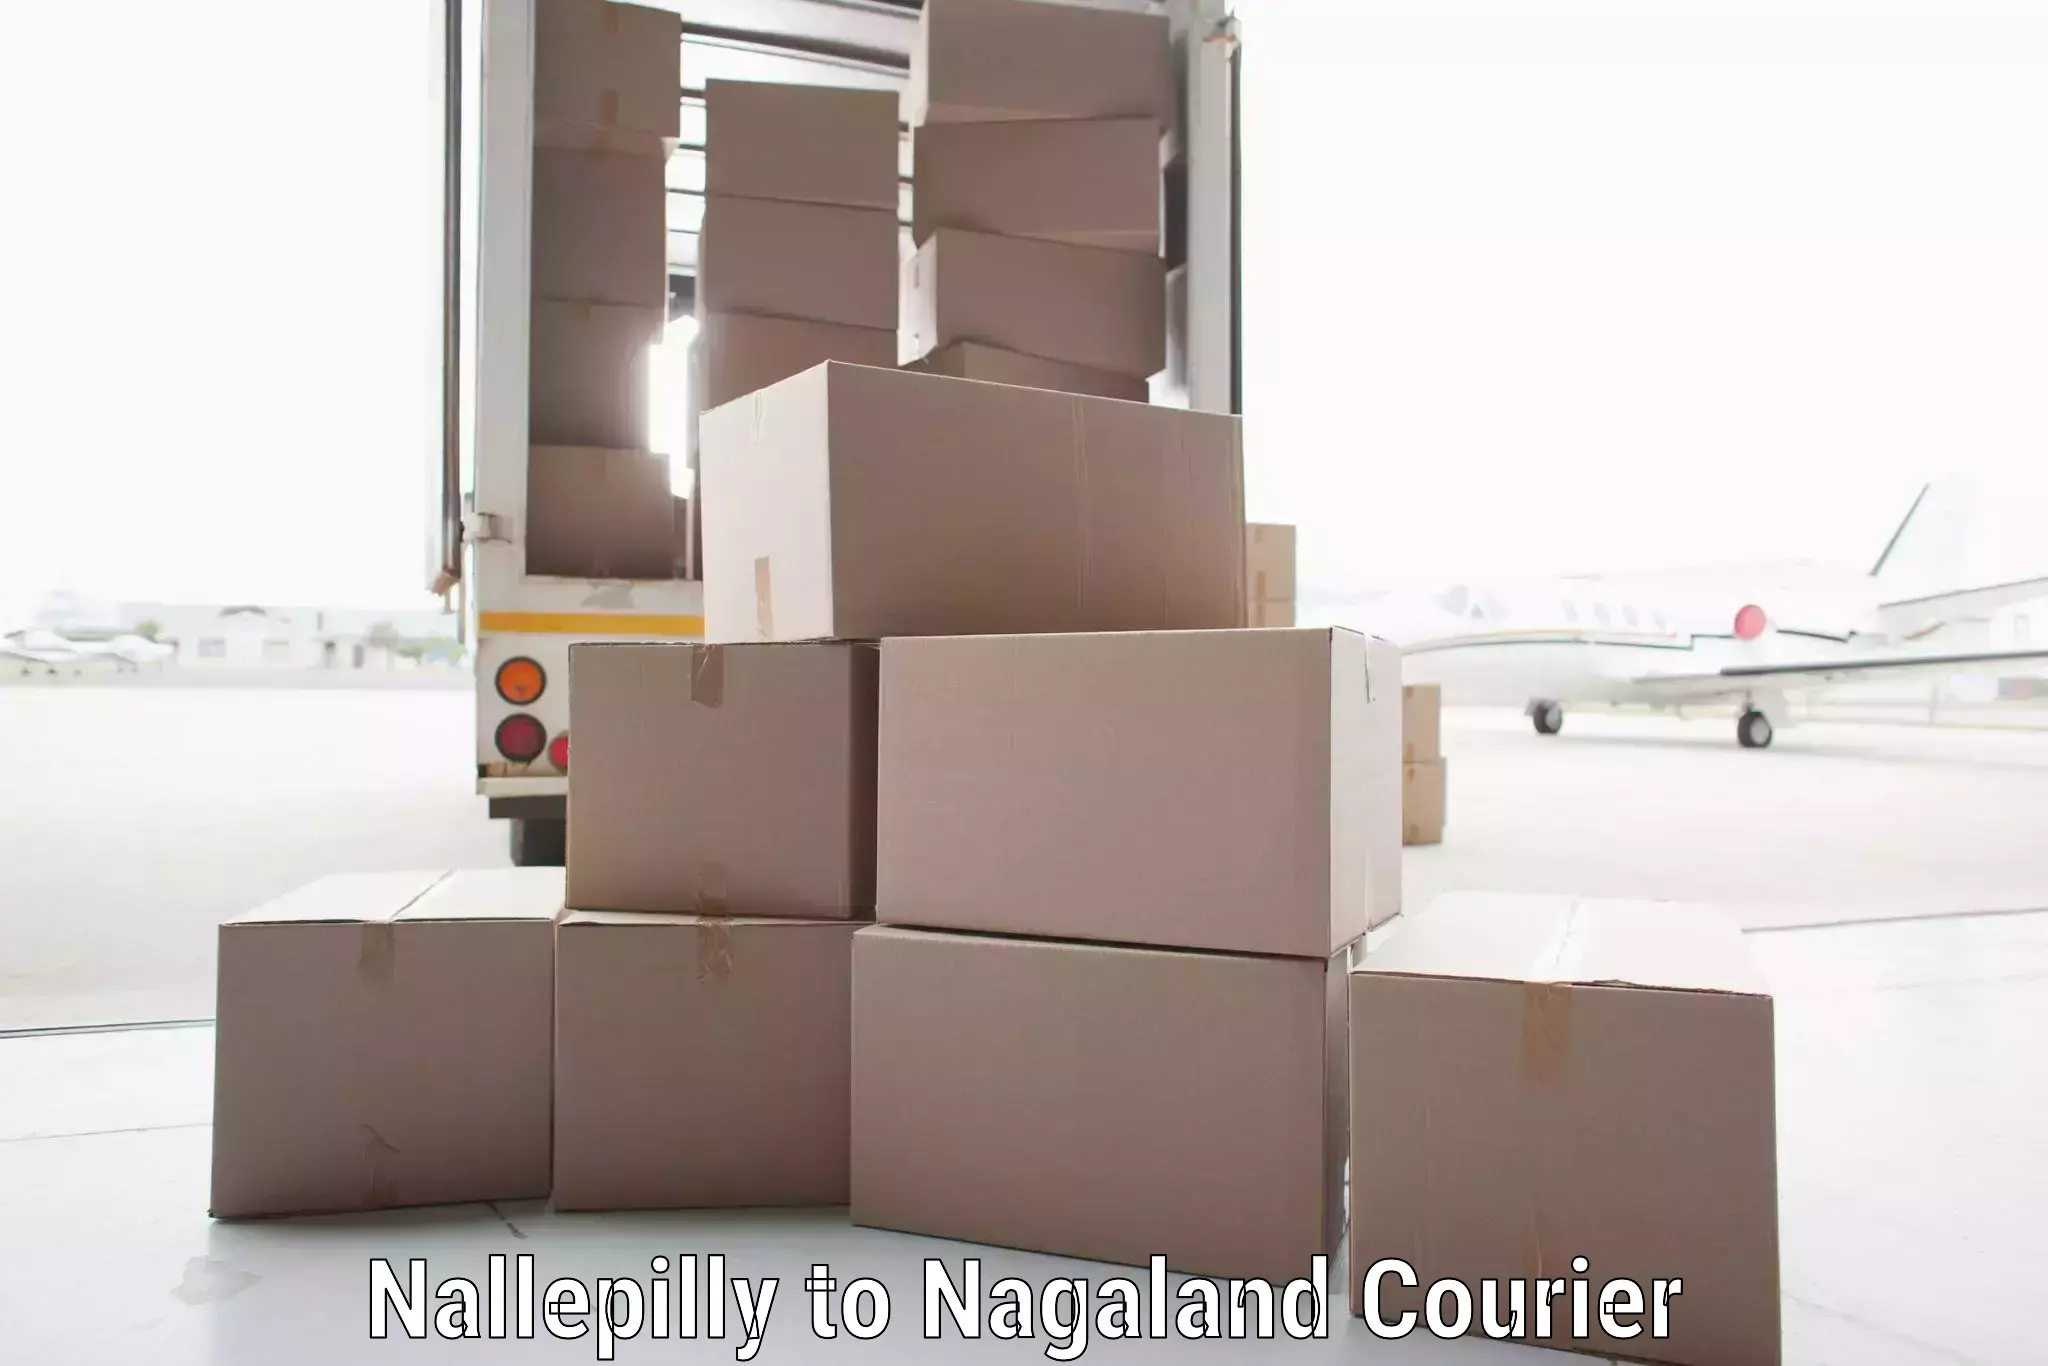 Global logistics network Nallepilly to Mon